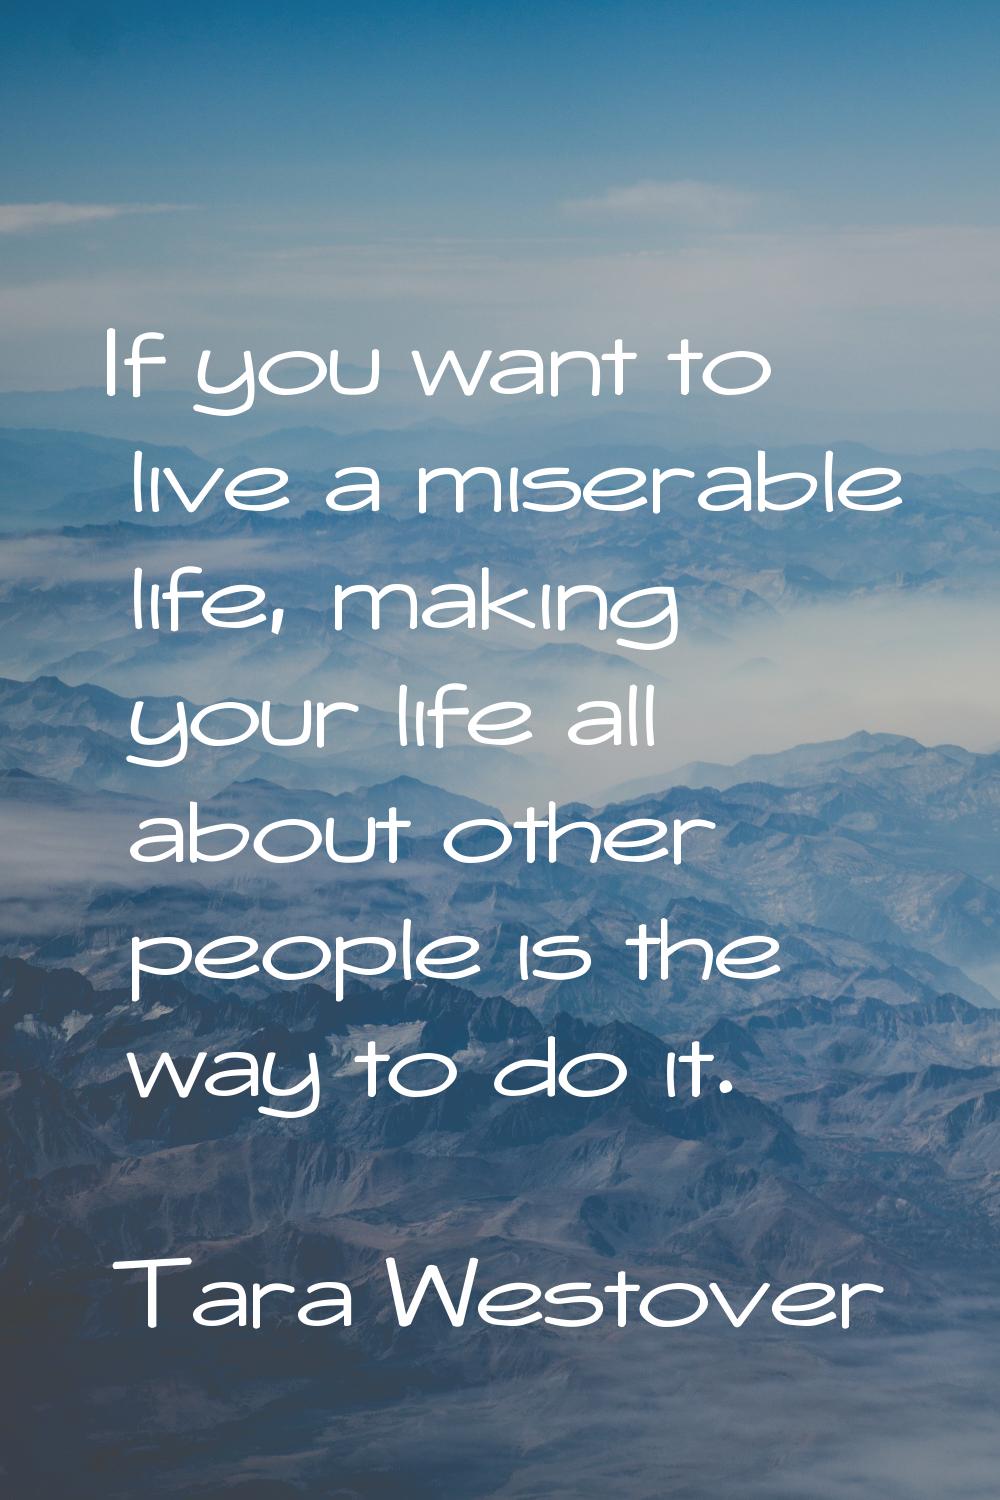 If you want to live a miserable life, making your life all about other people is the way to do it.